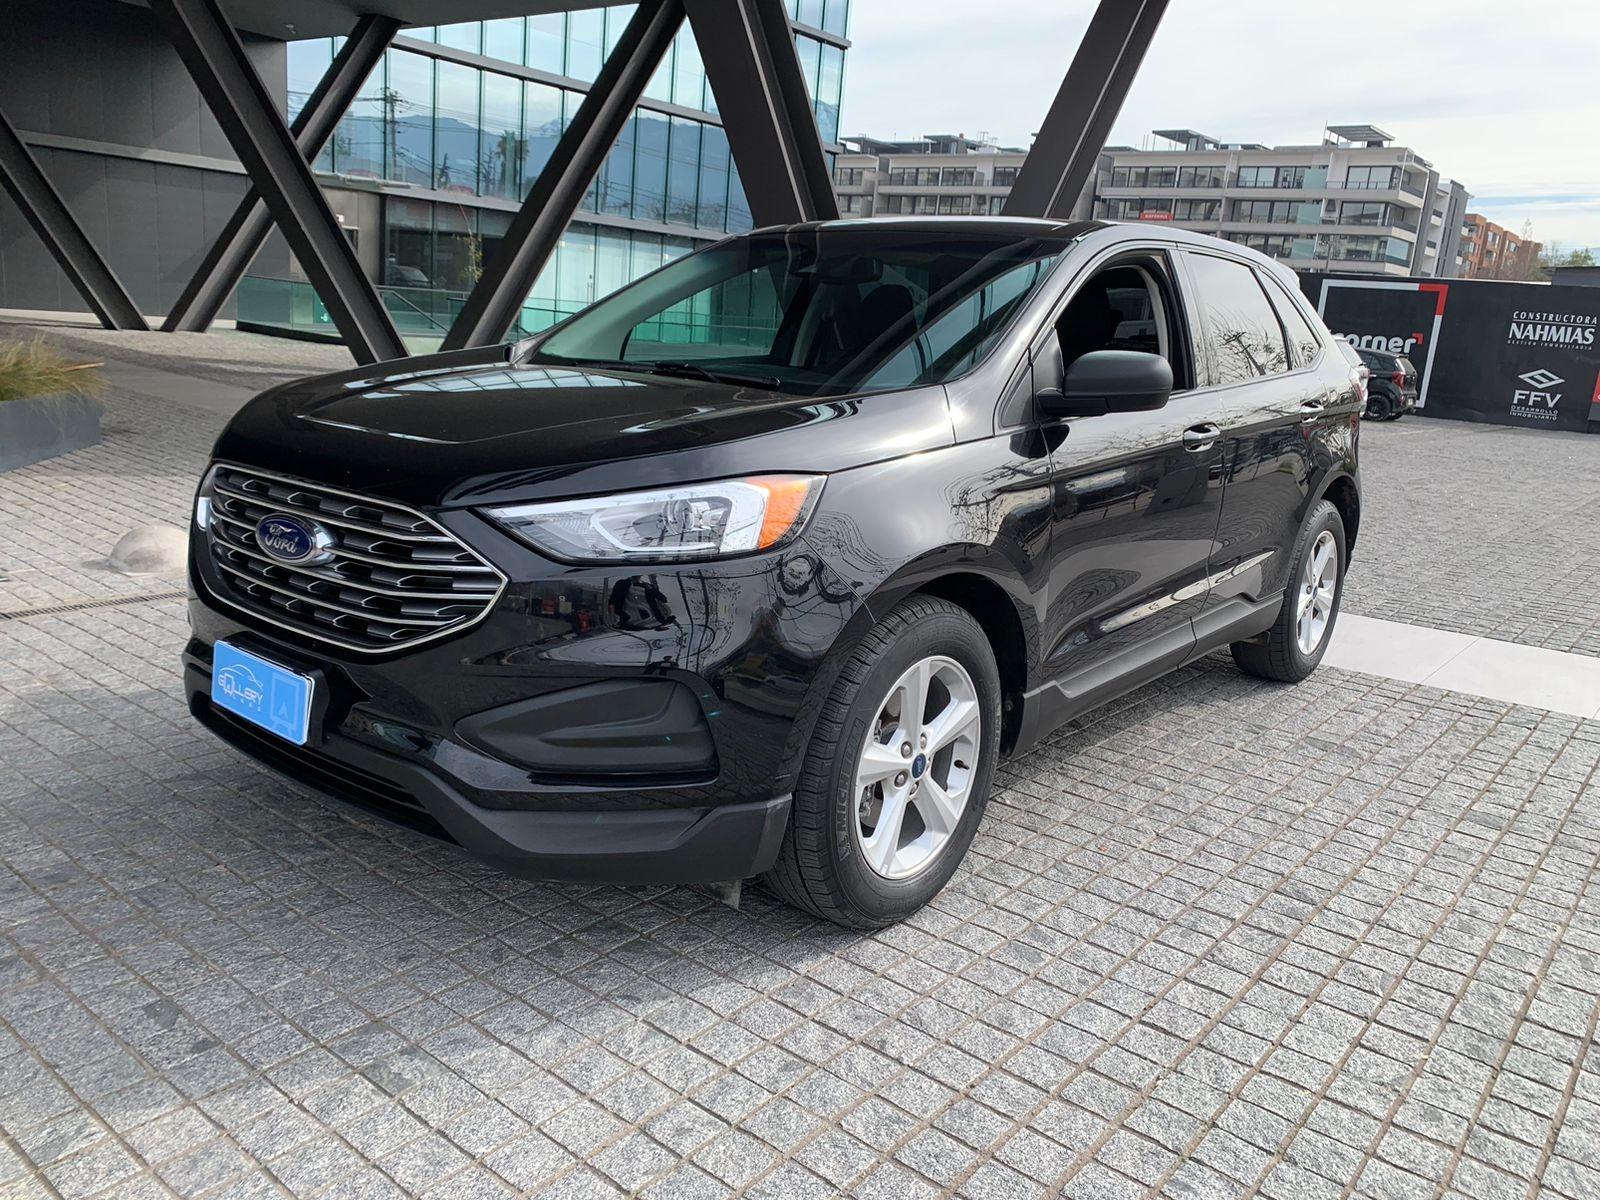 FORD EDGE 2.0 Ecobooost SEL 2020 2.0 ecoboost AUTOMATICO  - 